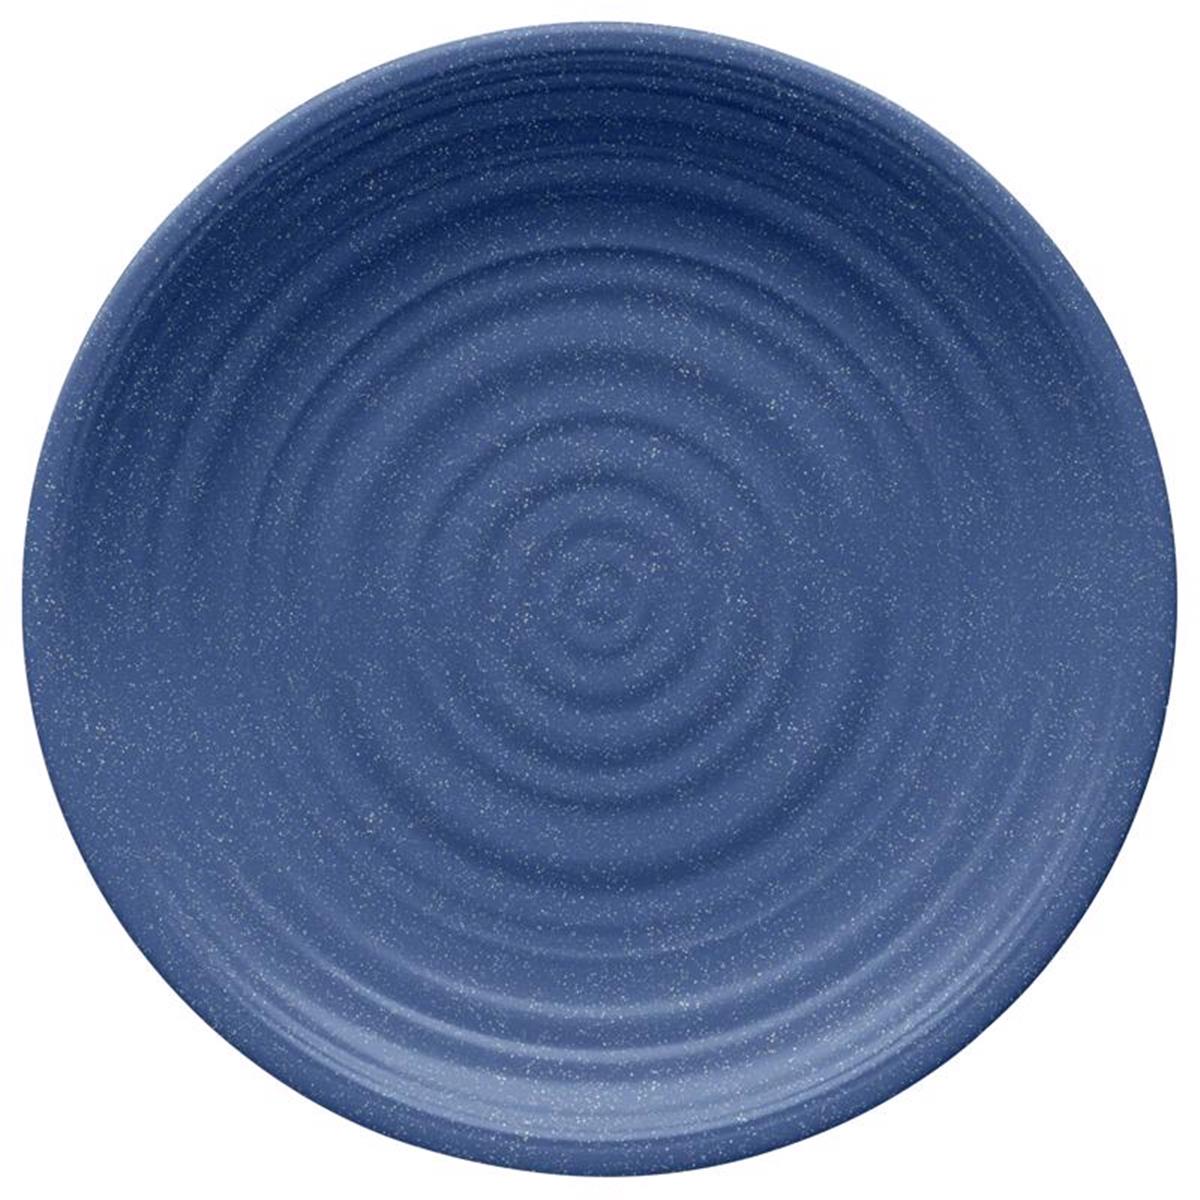 Picture of Tarhong 6032019 8.5 in. Dia. Bamboo Planta Artisan Salad Plate, Blue - Pack of 6